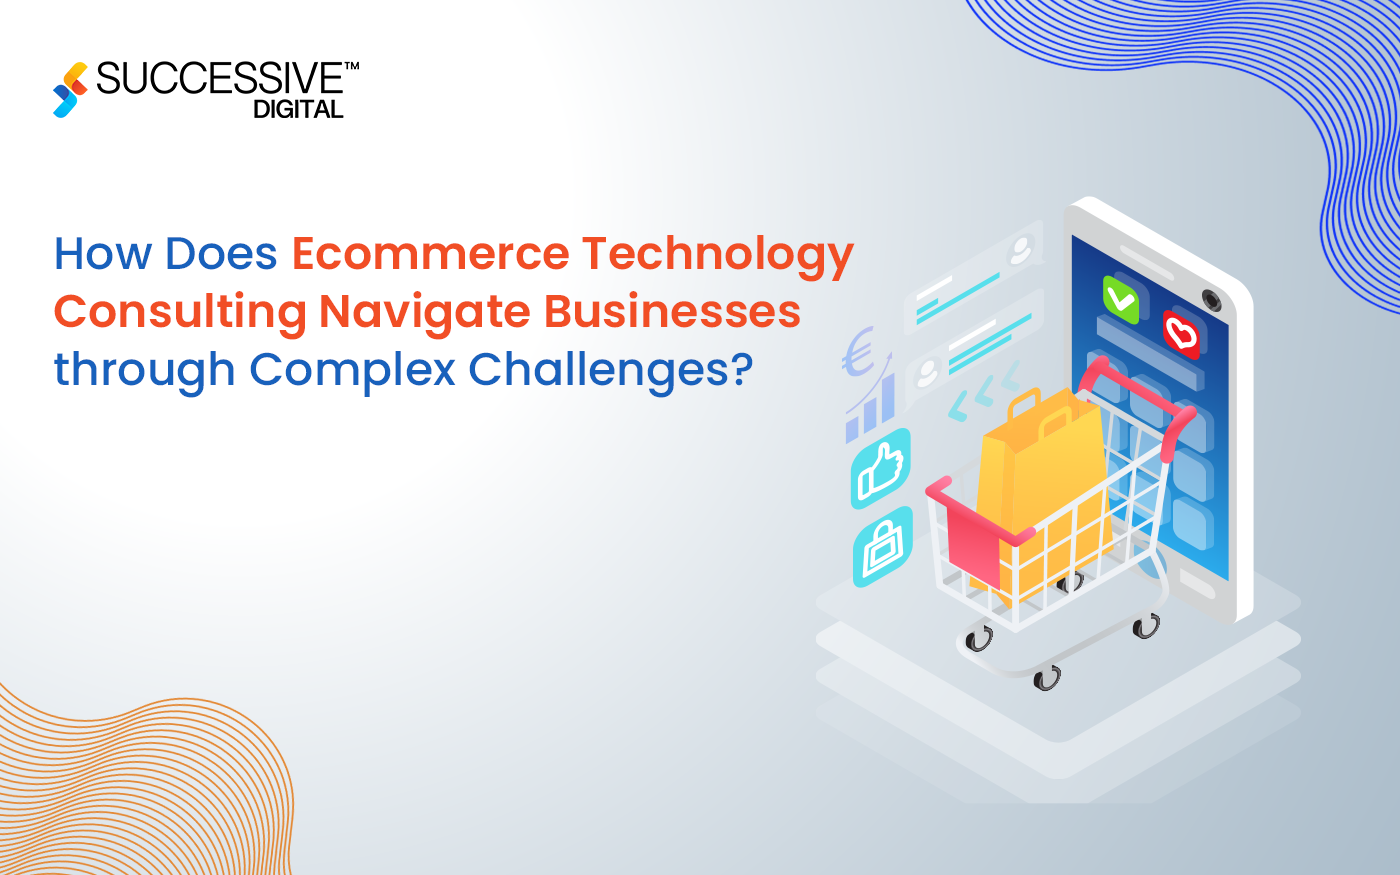 How Does Ecommerce Technology Consulting Navigate Businesses through Complex Challenges?